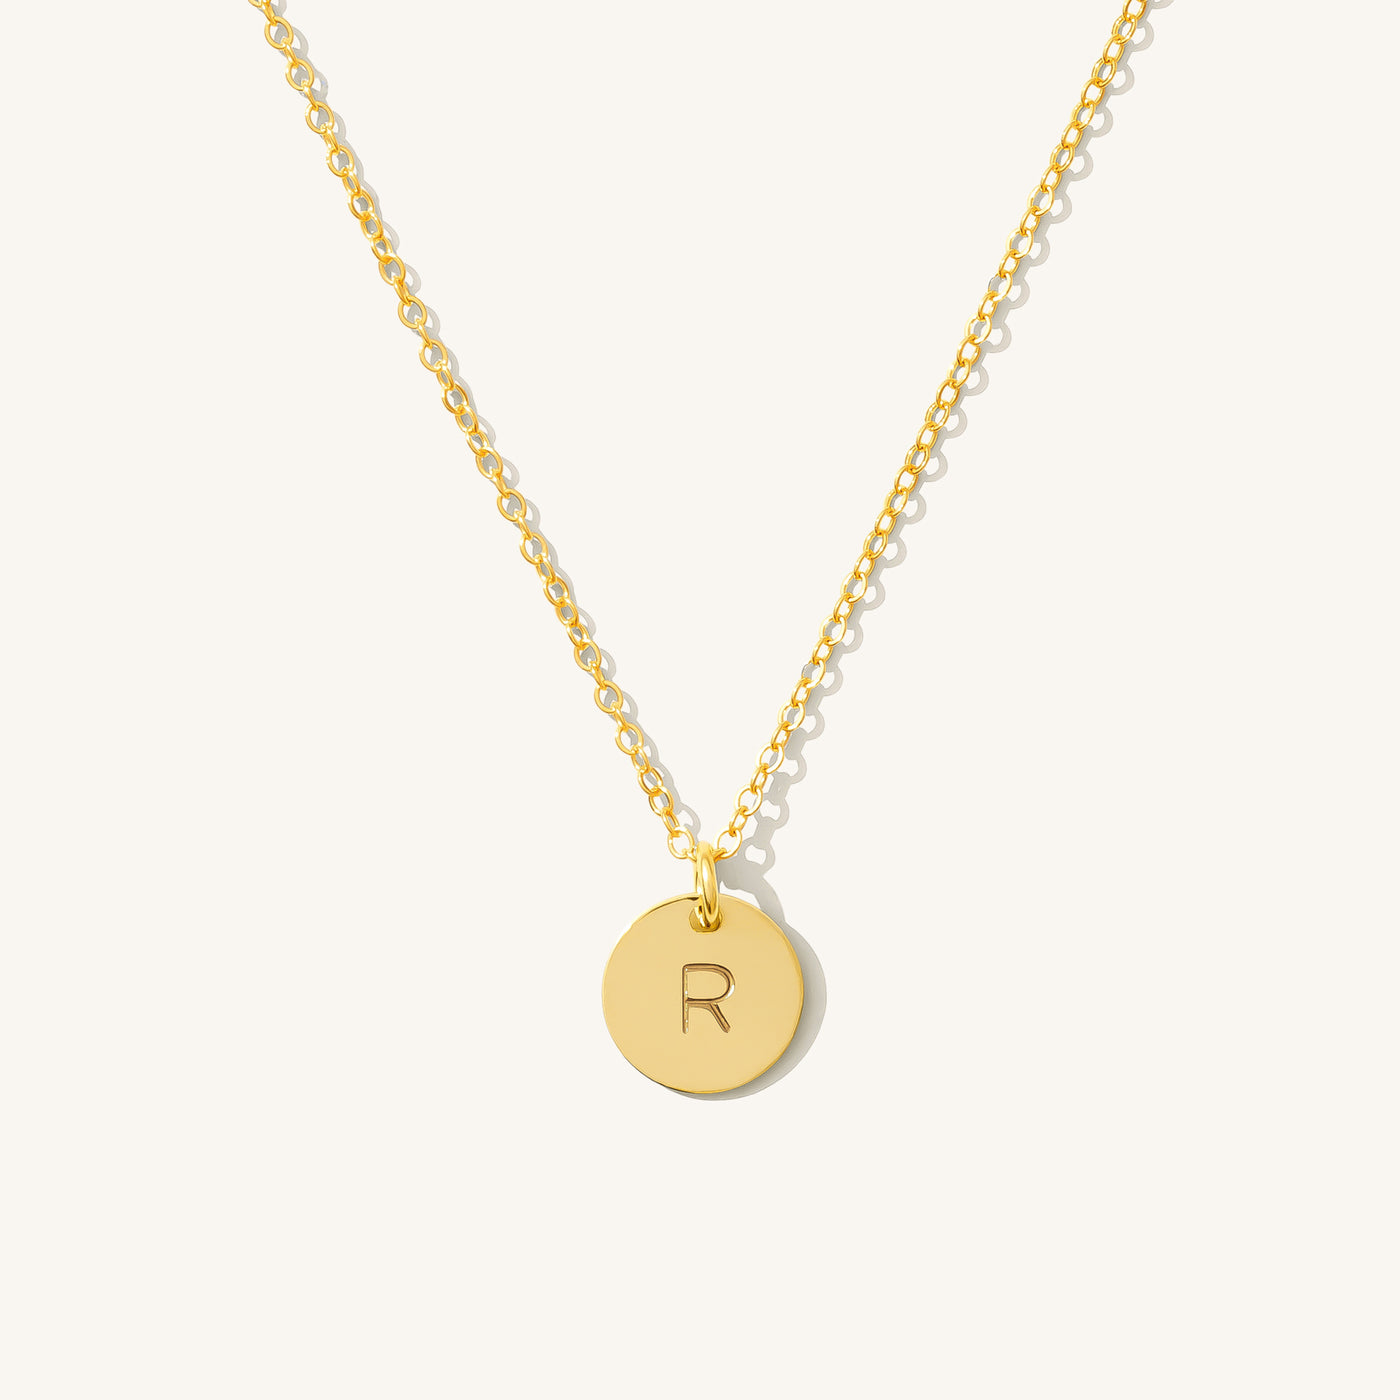 R Dainty Initial Necklace